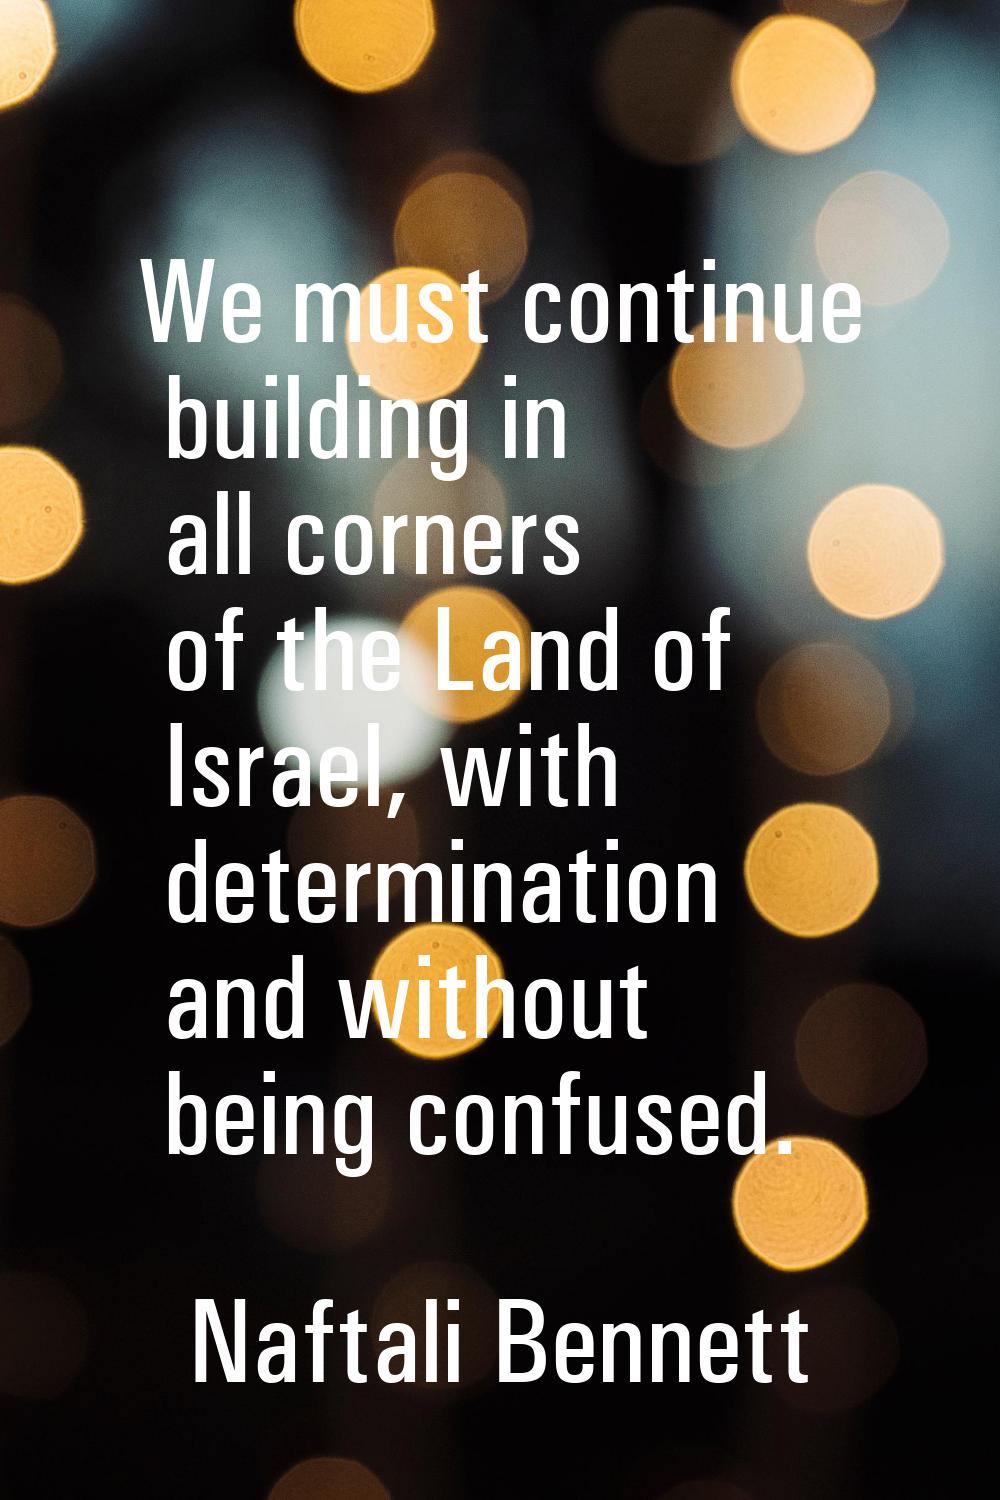 We must continue building in all corners of the Land of Israel, with determination and without bein